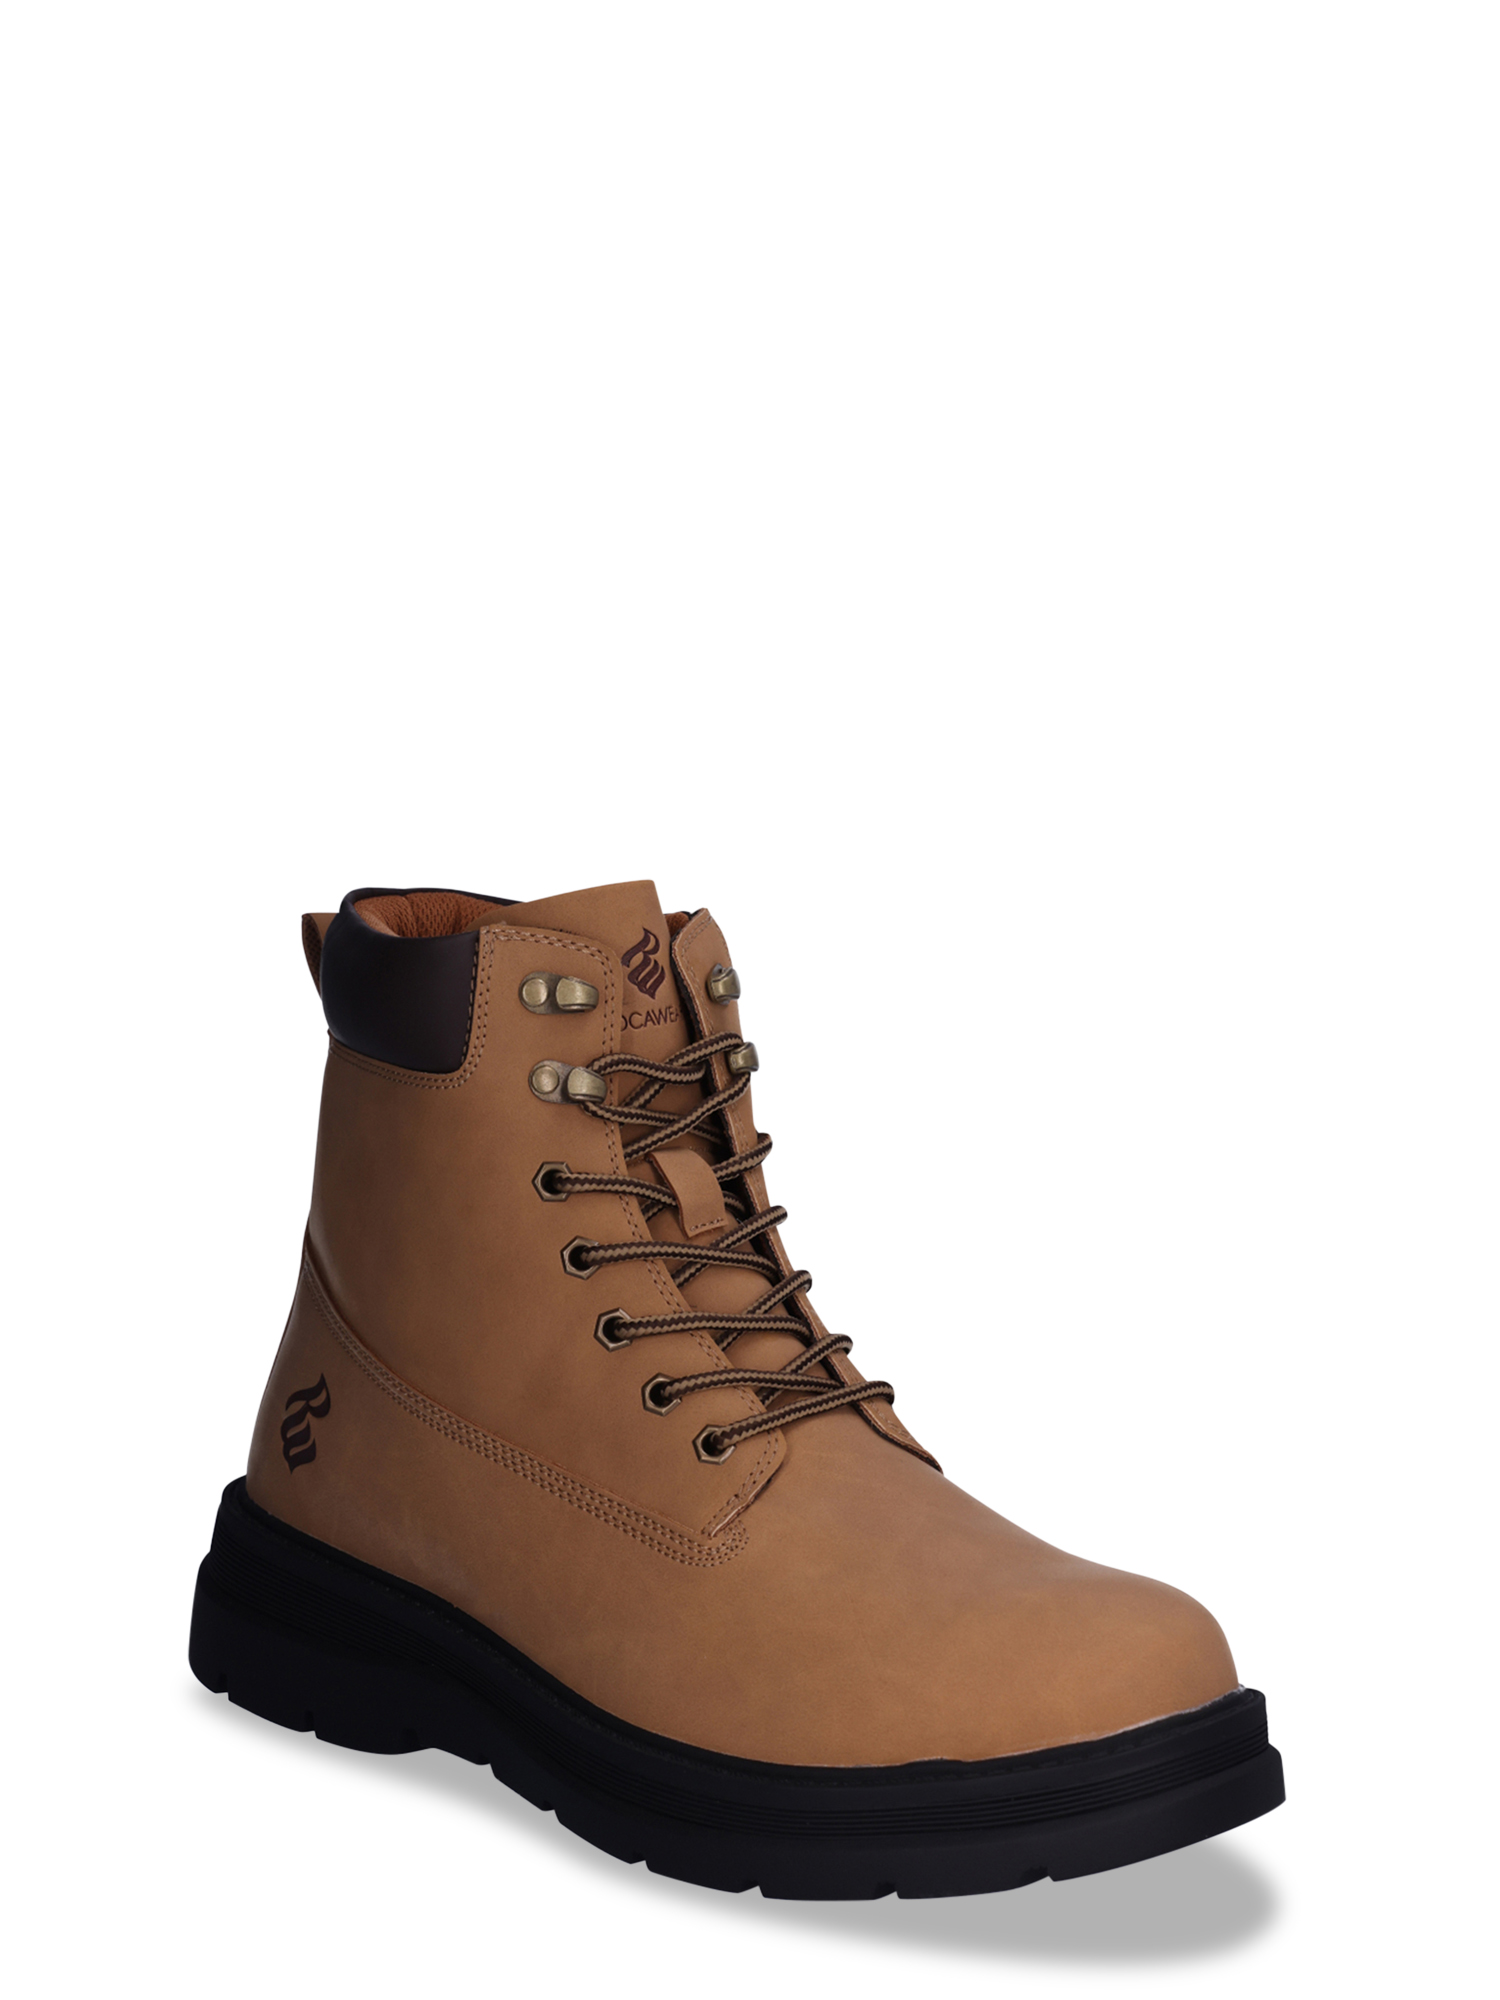 Rocawear Men's Georgia Lace Up Boots - image 1 of 5